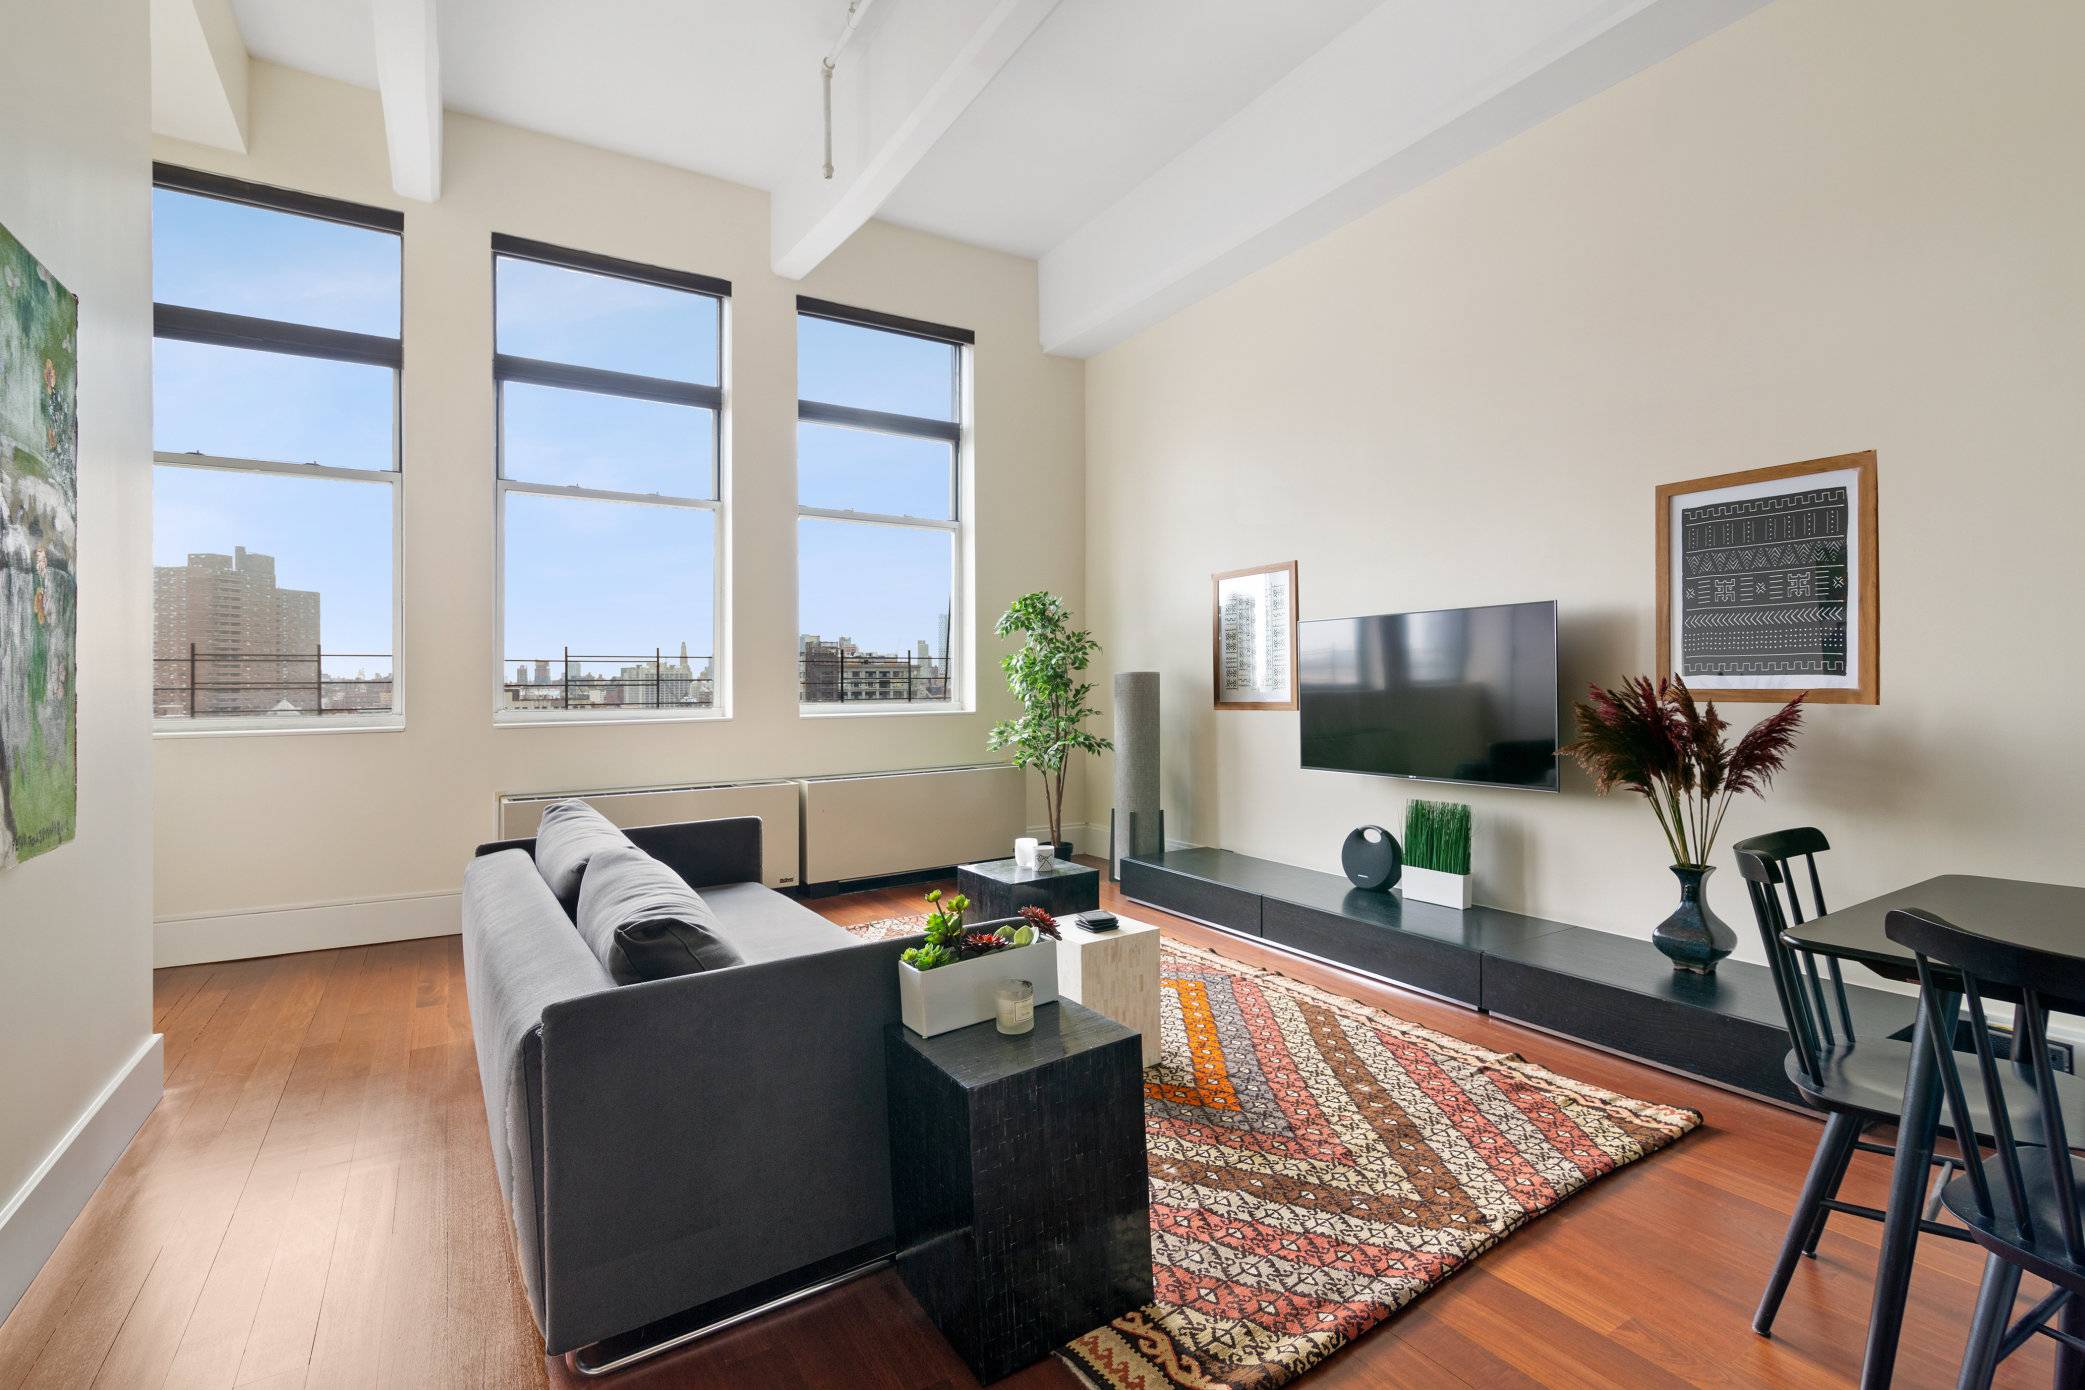 That spacious, sun filled two bedroom loft you've been looking for is right here.